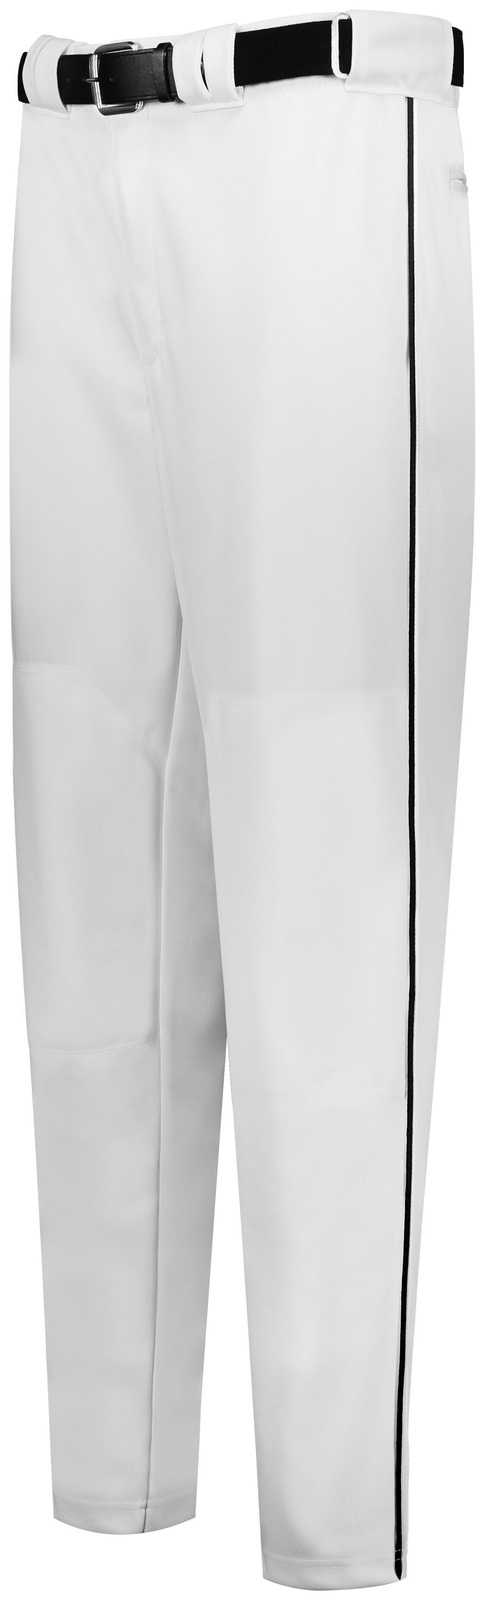 Russell R11Lgm Piped Diamond Series Baseball Pant 2.0 - White Black - HIT a Double